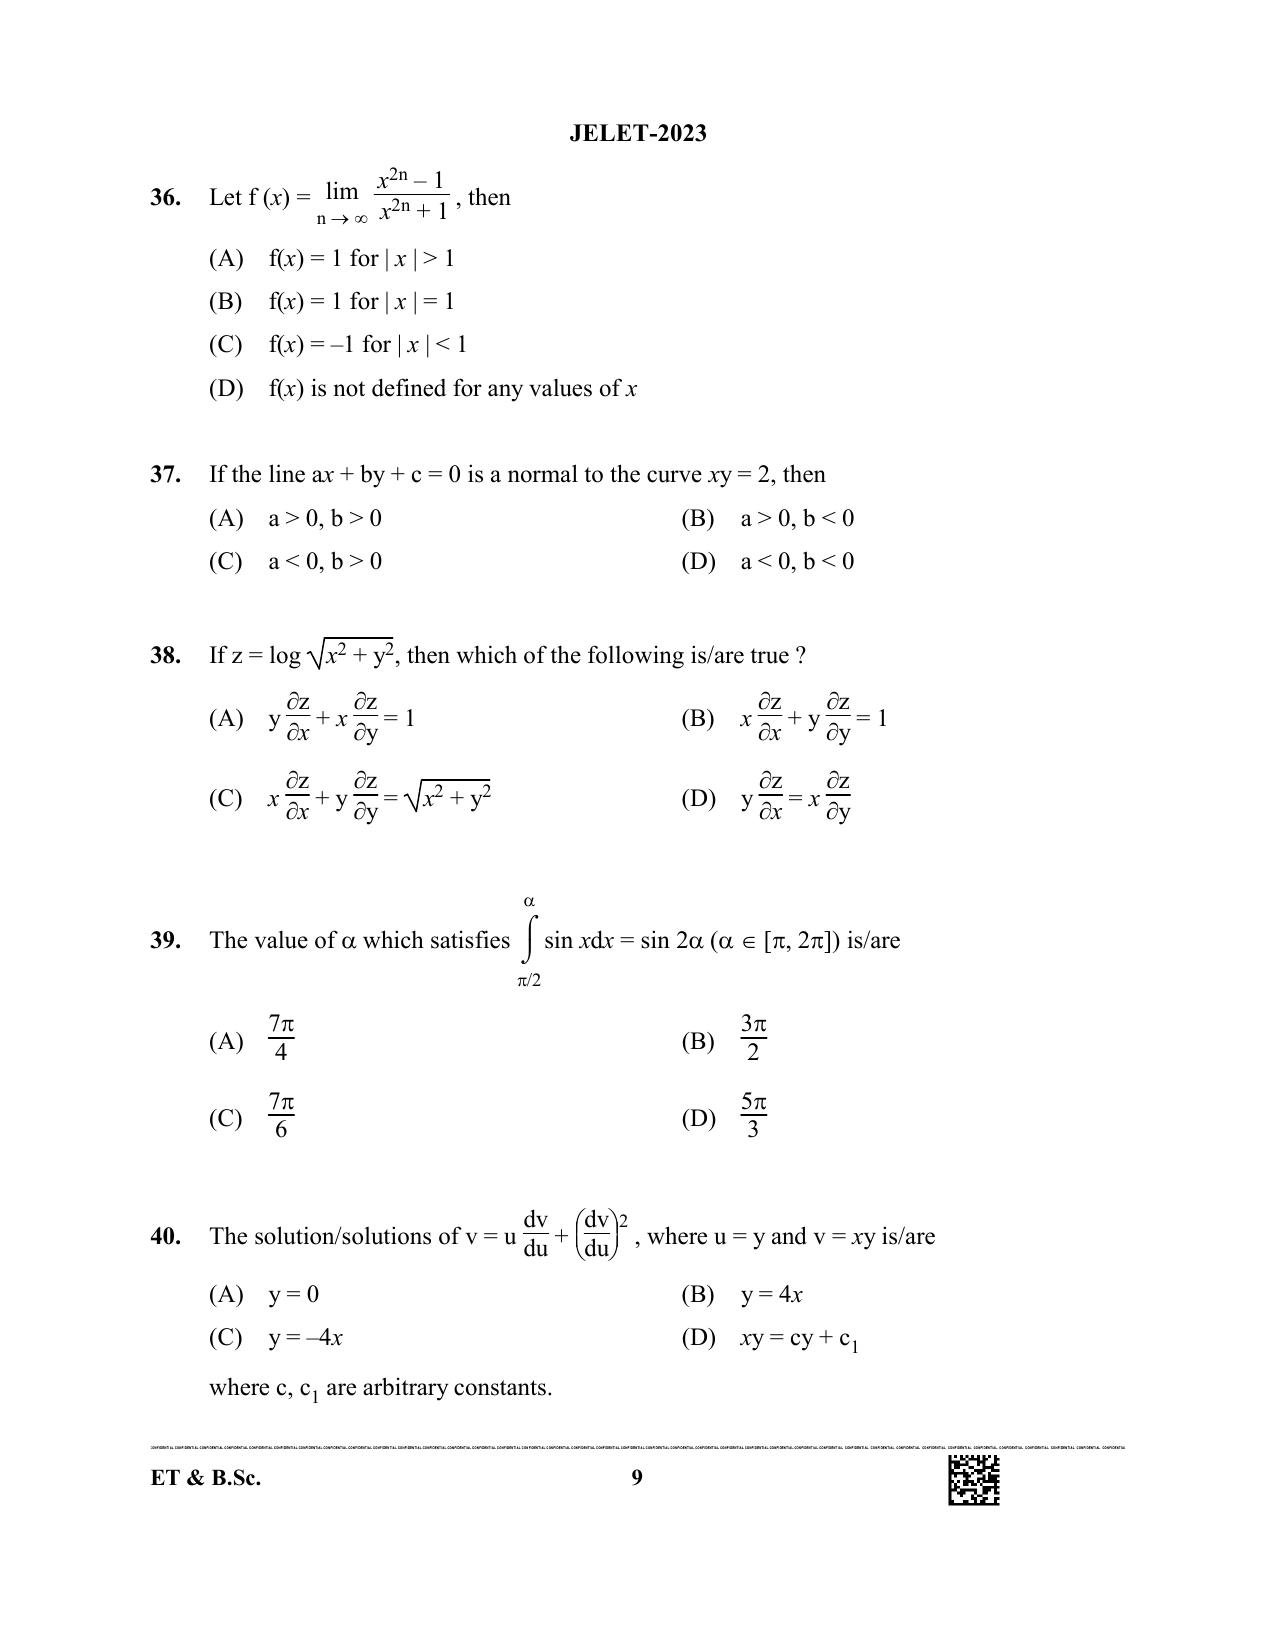 WBJEE JELET 2023 Paper I (ET & BSC) Question Papers - Page 9